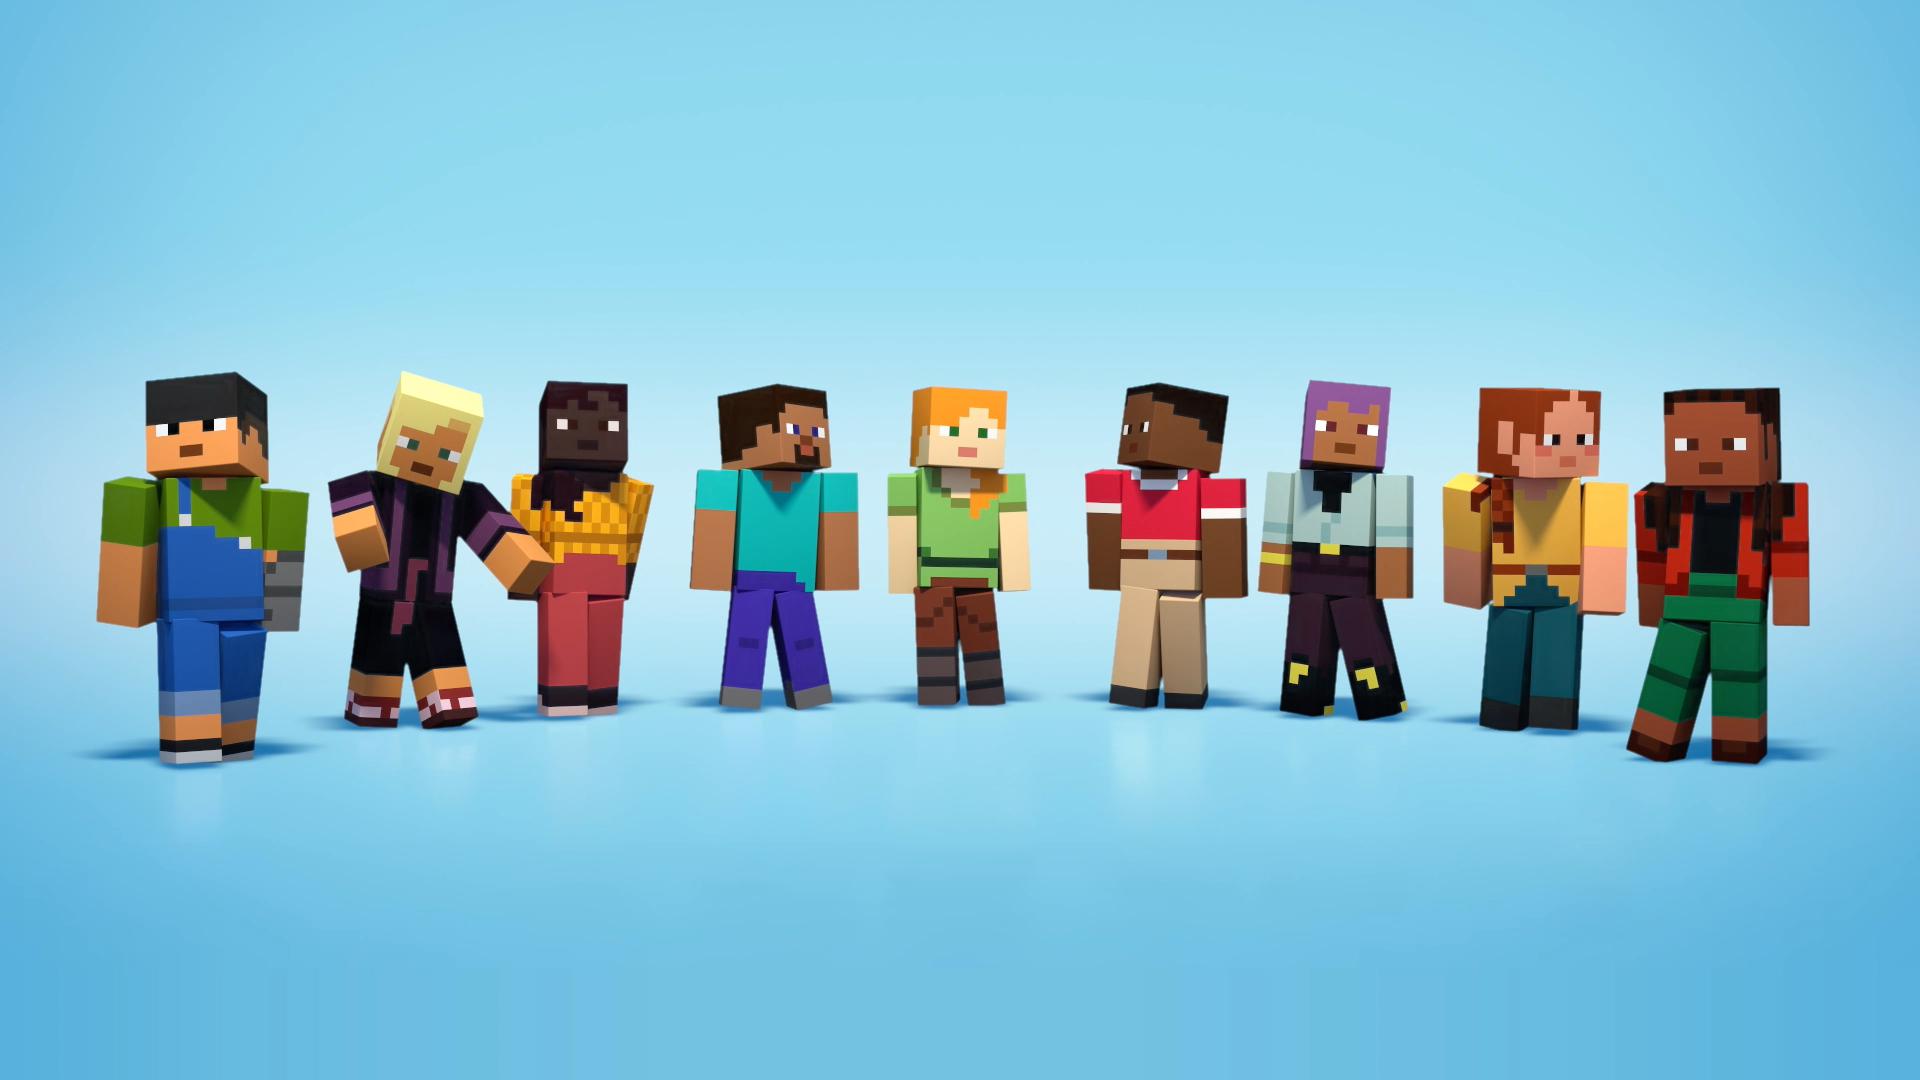 Minecraft - on a blue background, Steve and Alex stand between seven new default character skins.